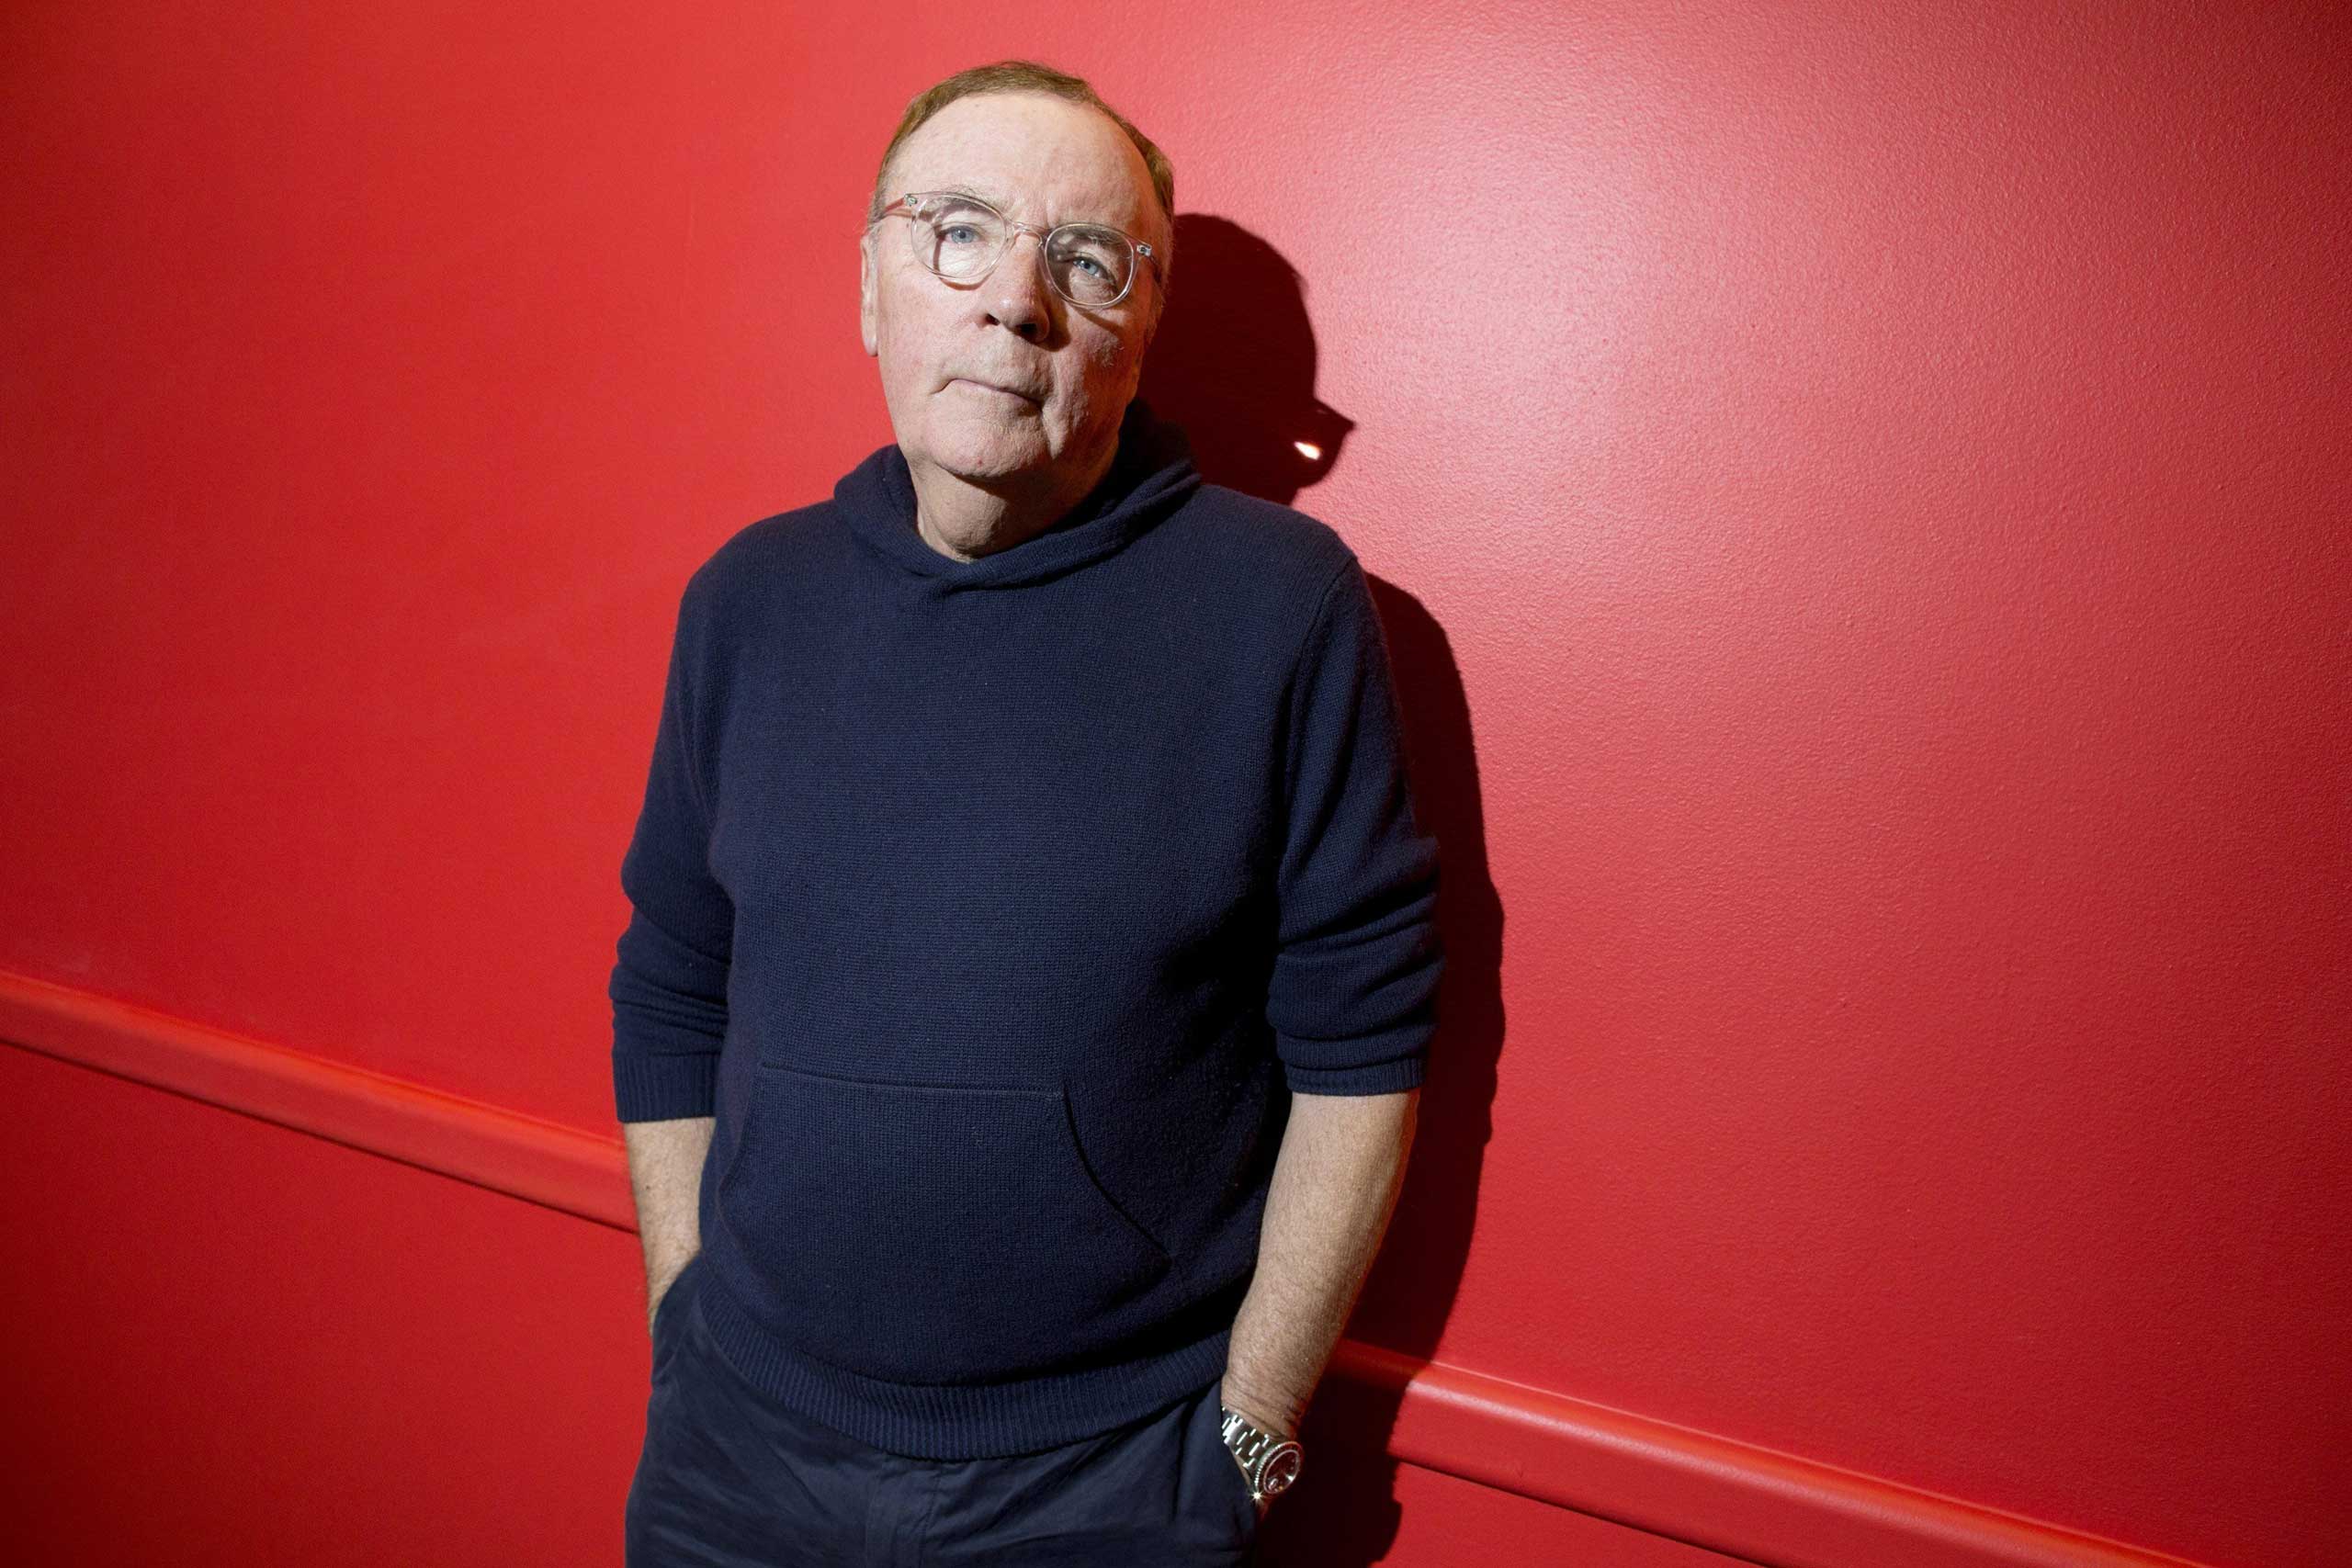 James Patterson, Author of Along Came a Spider.
                               As a kid, Peter Pan was one of a few books that I truly enjoyed.  It’s got pirates, fairies, mermaids—what’s not to like?  When I was starting to write
                              Maximum Ride, my first series for kids, I had Mr. Barrie’s
                               story in the back of my mind.